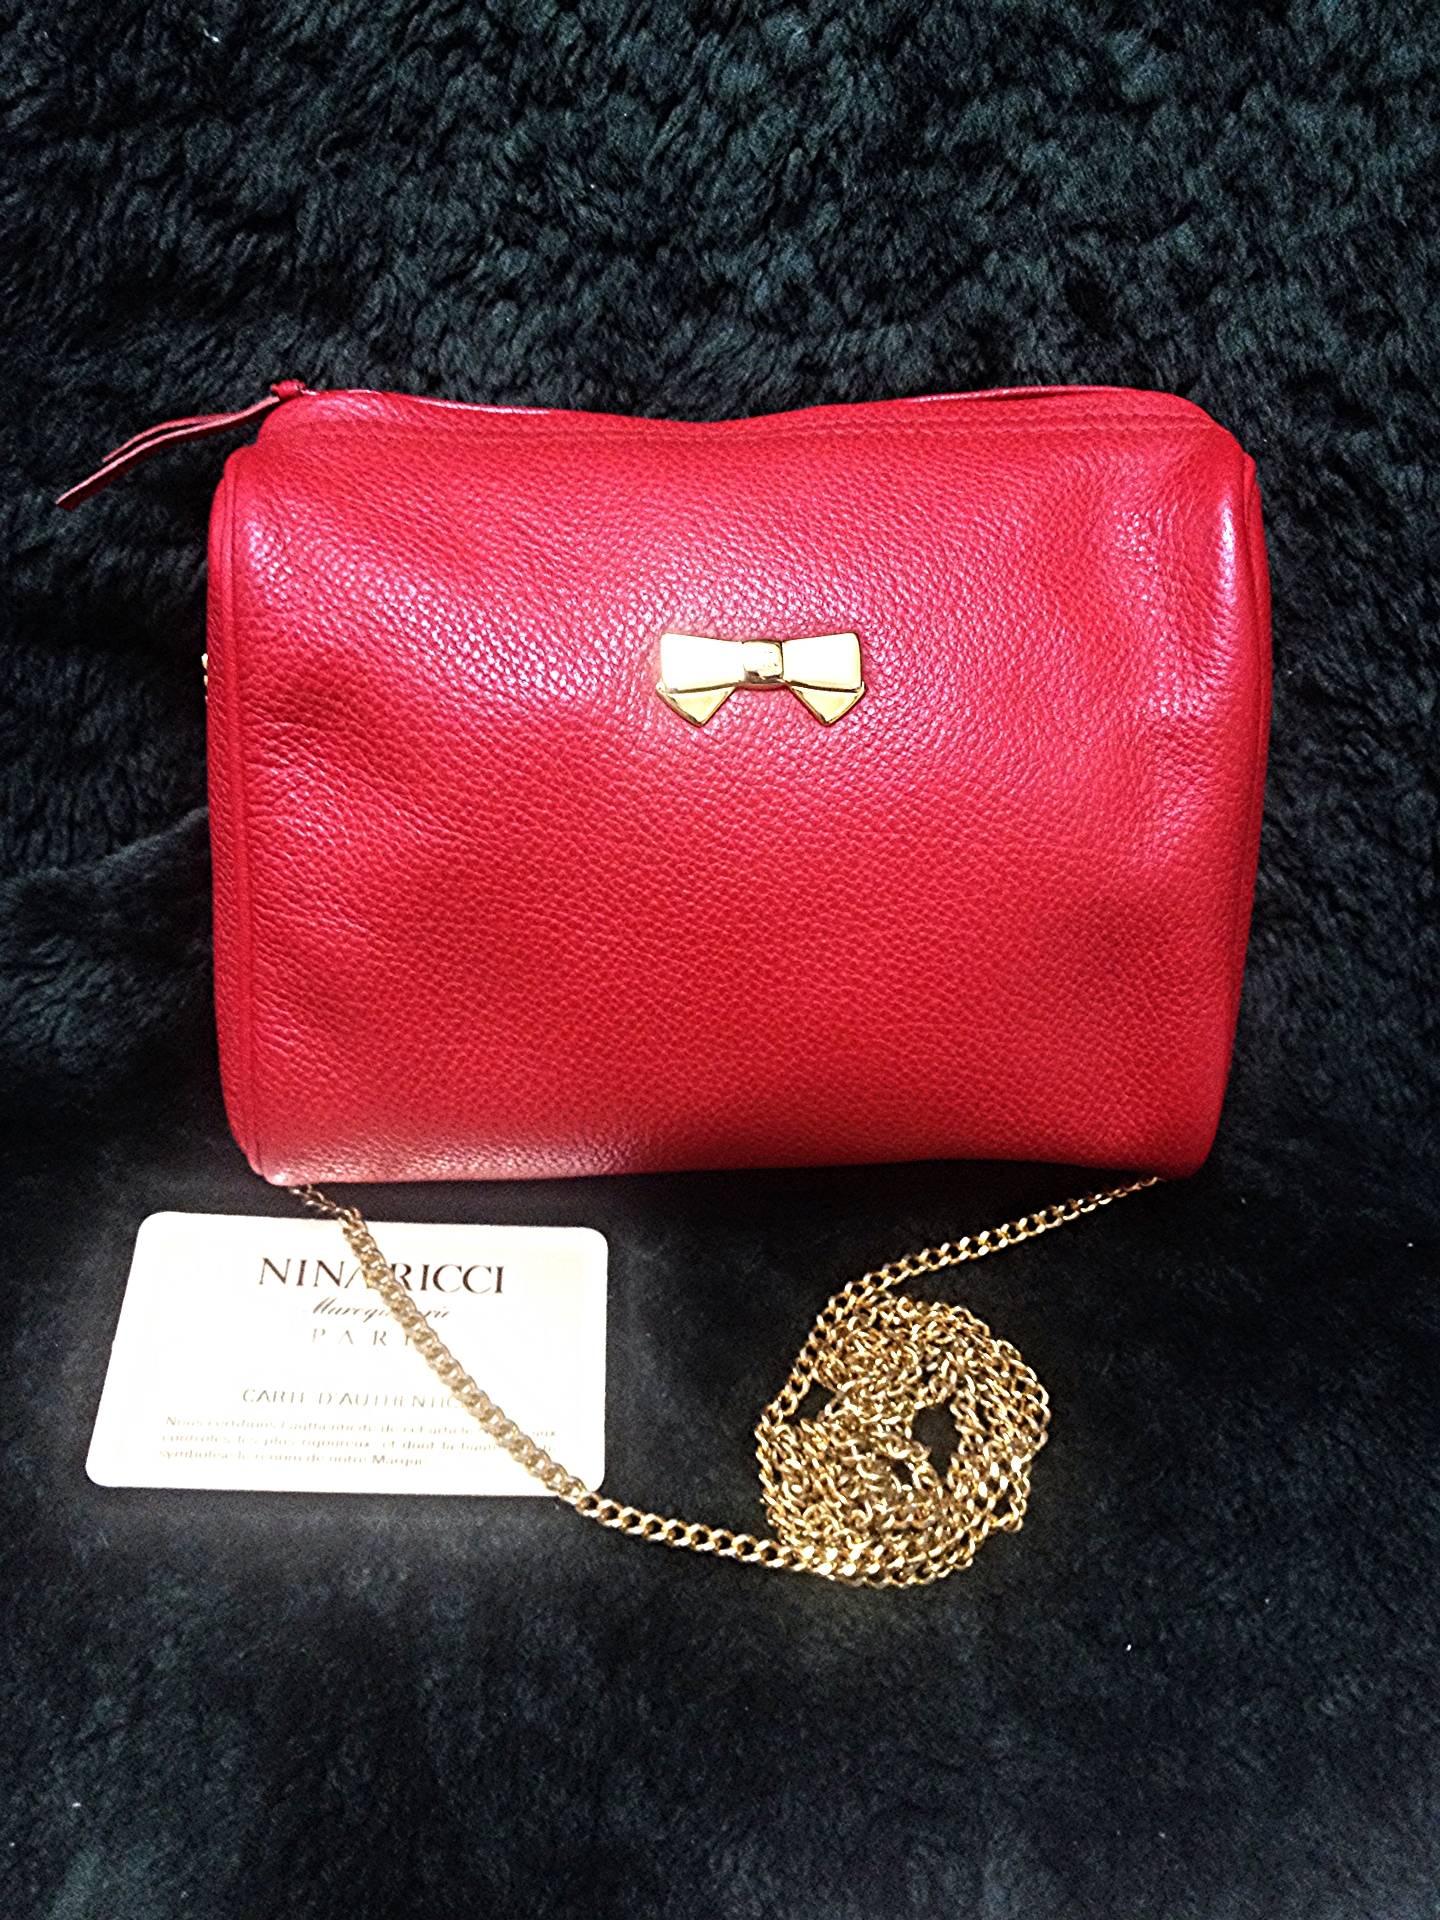 Vintage Nina Ricci red leather mini pouch purse with golden chain shoulder strap 4